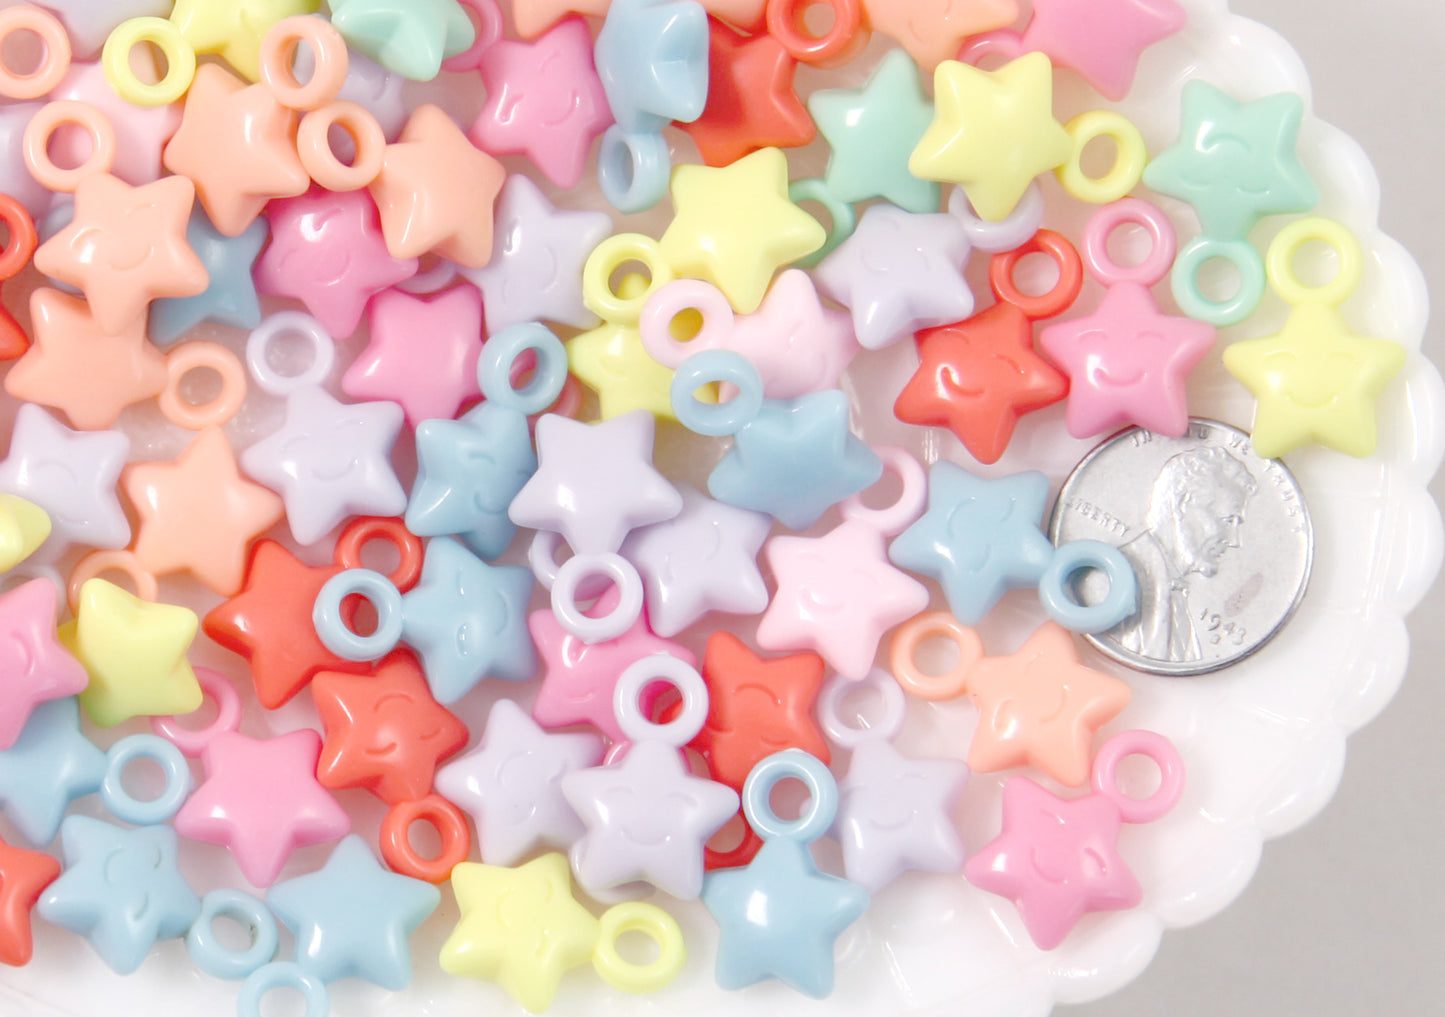 Pastel Star Charms - 18mm Tiny Pastel Star Charms with Faces Plastic or Acrylic Charms or Pendants - 70 pc set